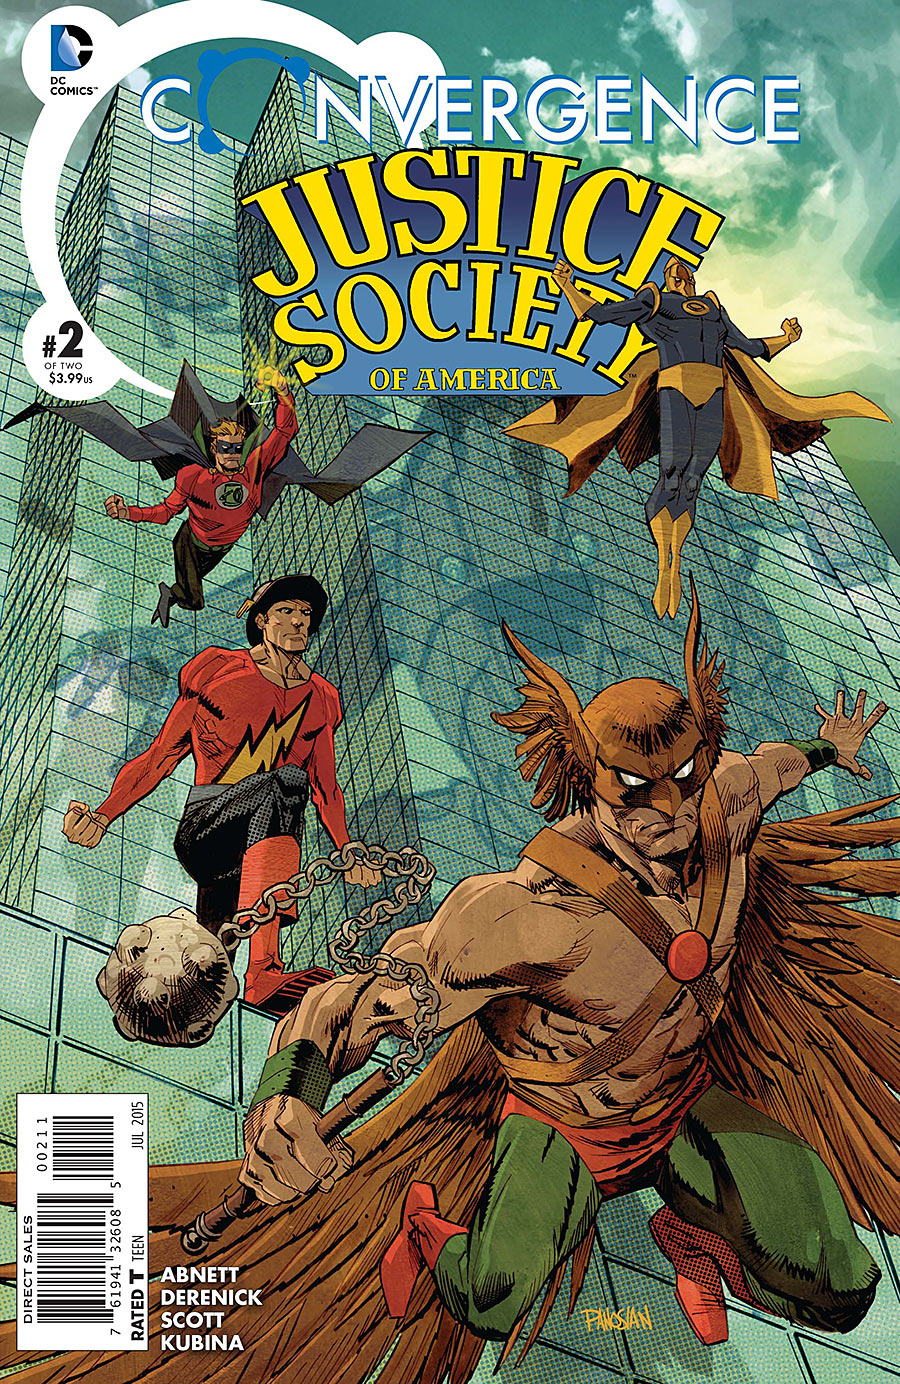 Convergence: Justice Society of America Vol. 1 #2